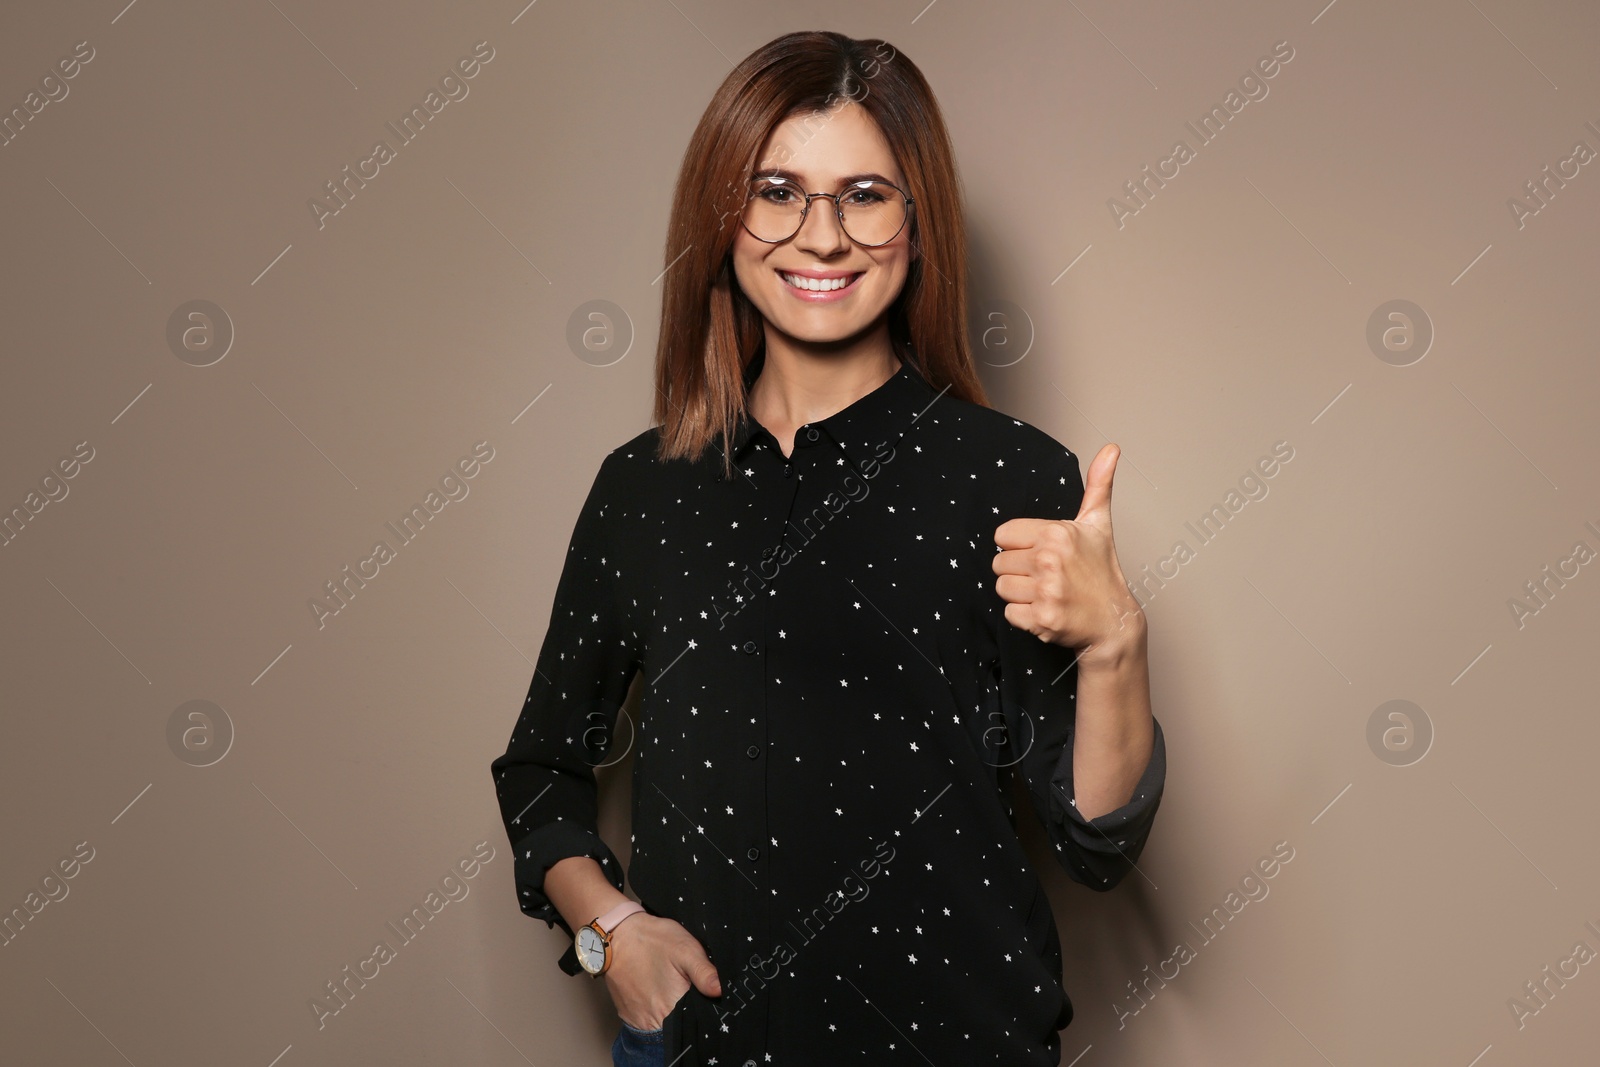 Photo of Woman showing THUMB UP gesture in sign language on color background